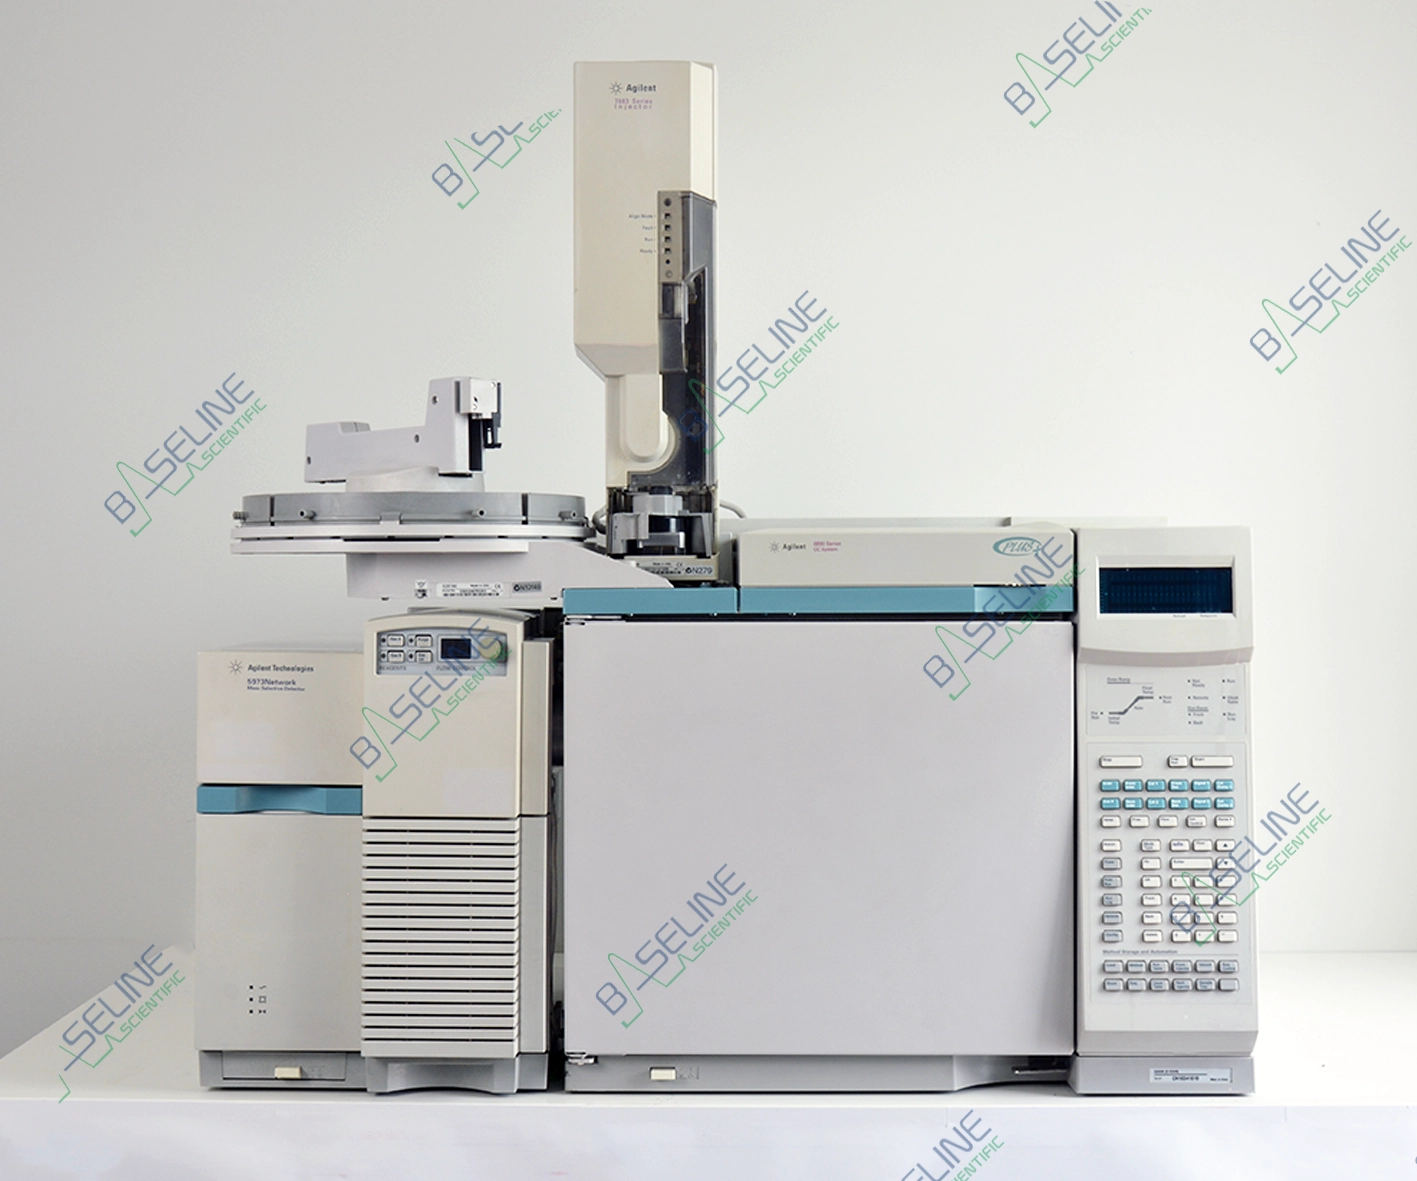 Refurbished Agilent 6890 GC with 5973A MSD Standard Turbo Pump and 7683 Autosampler